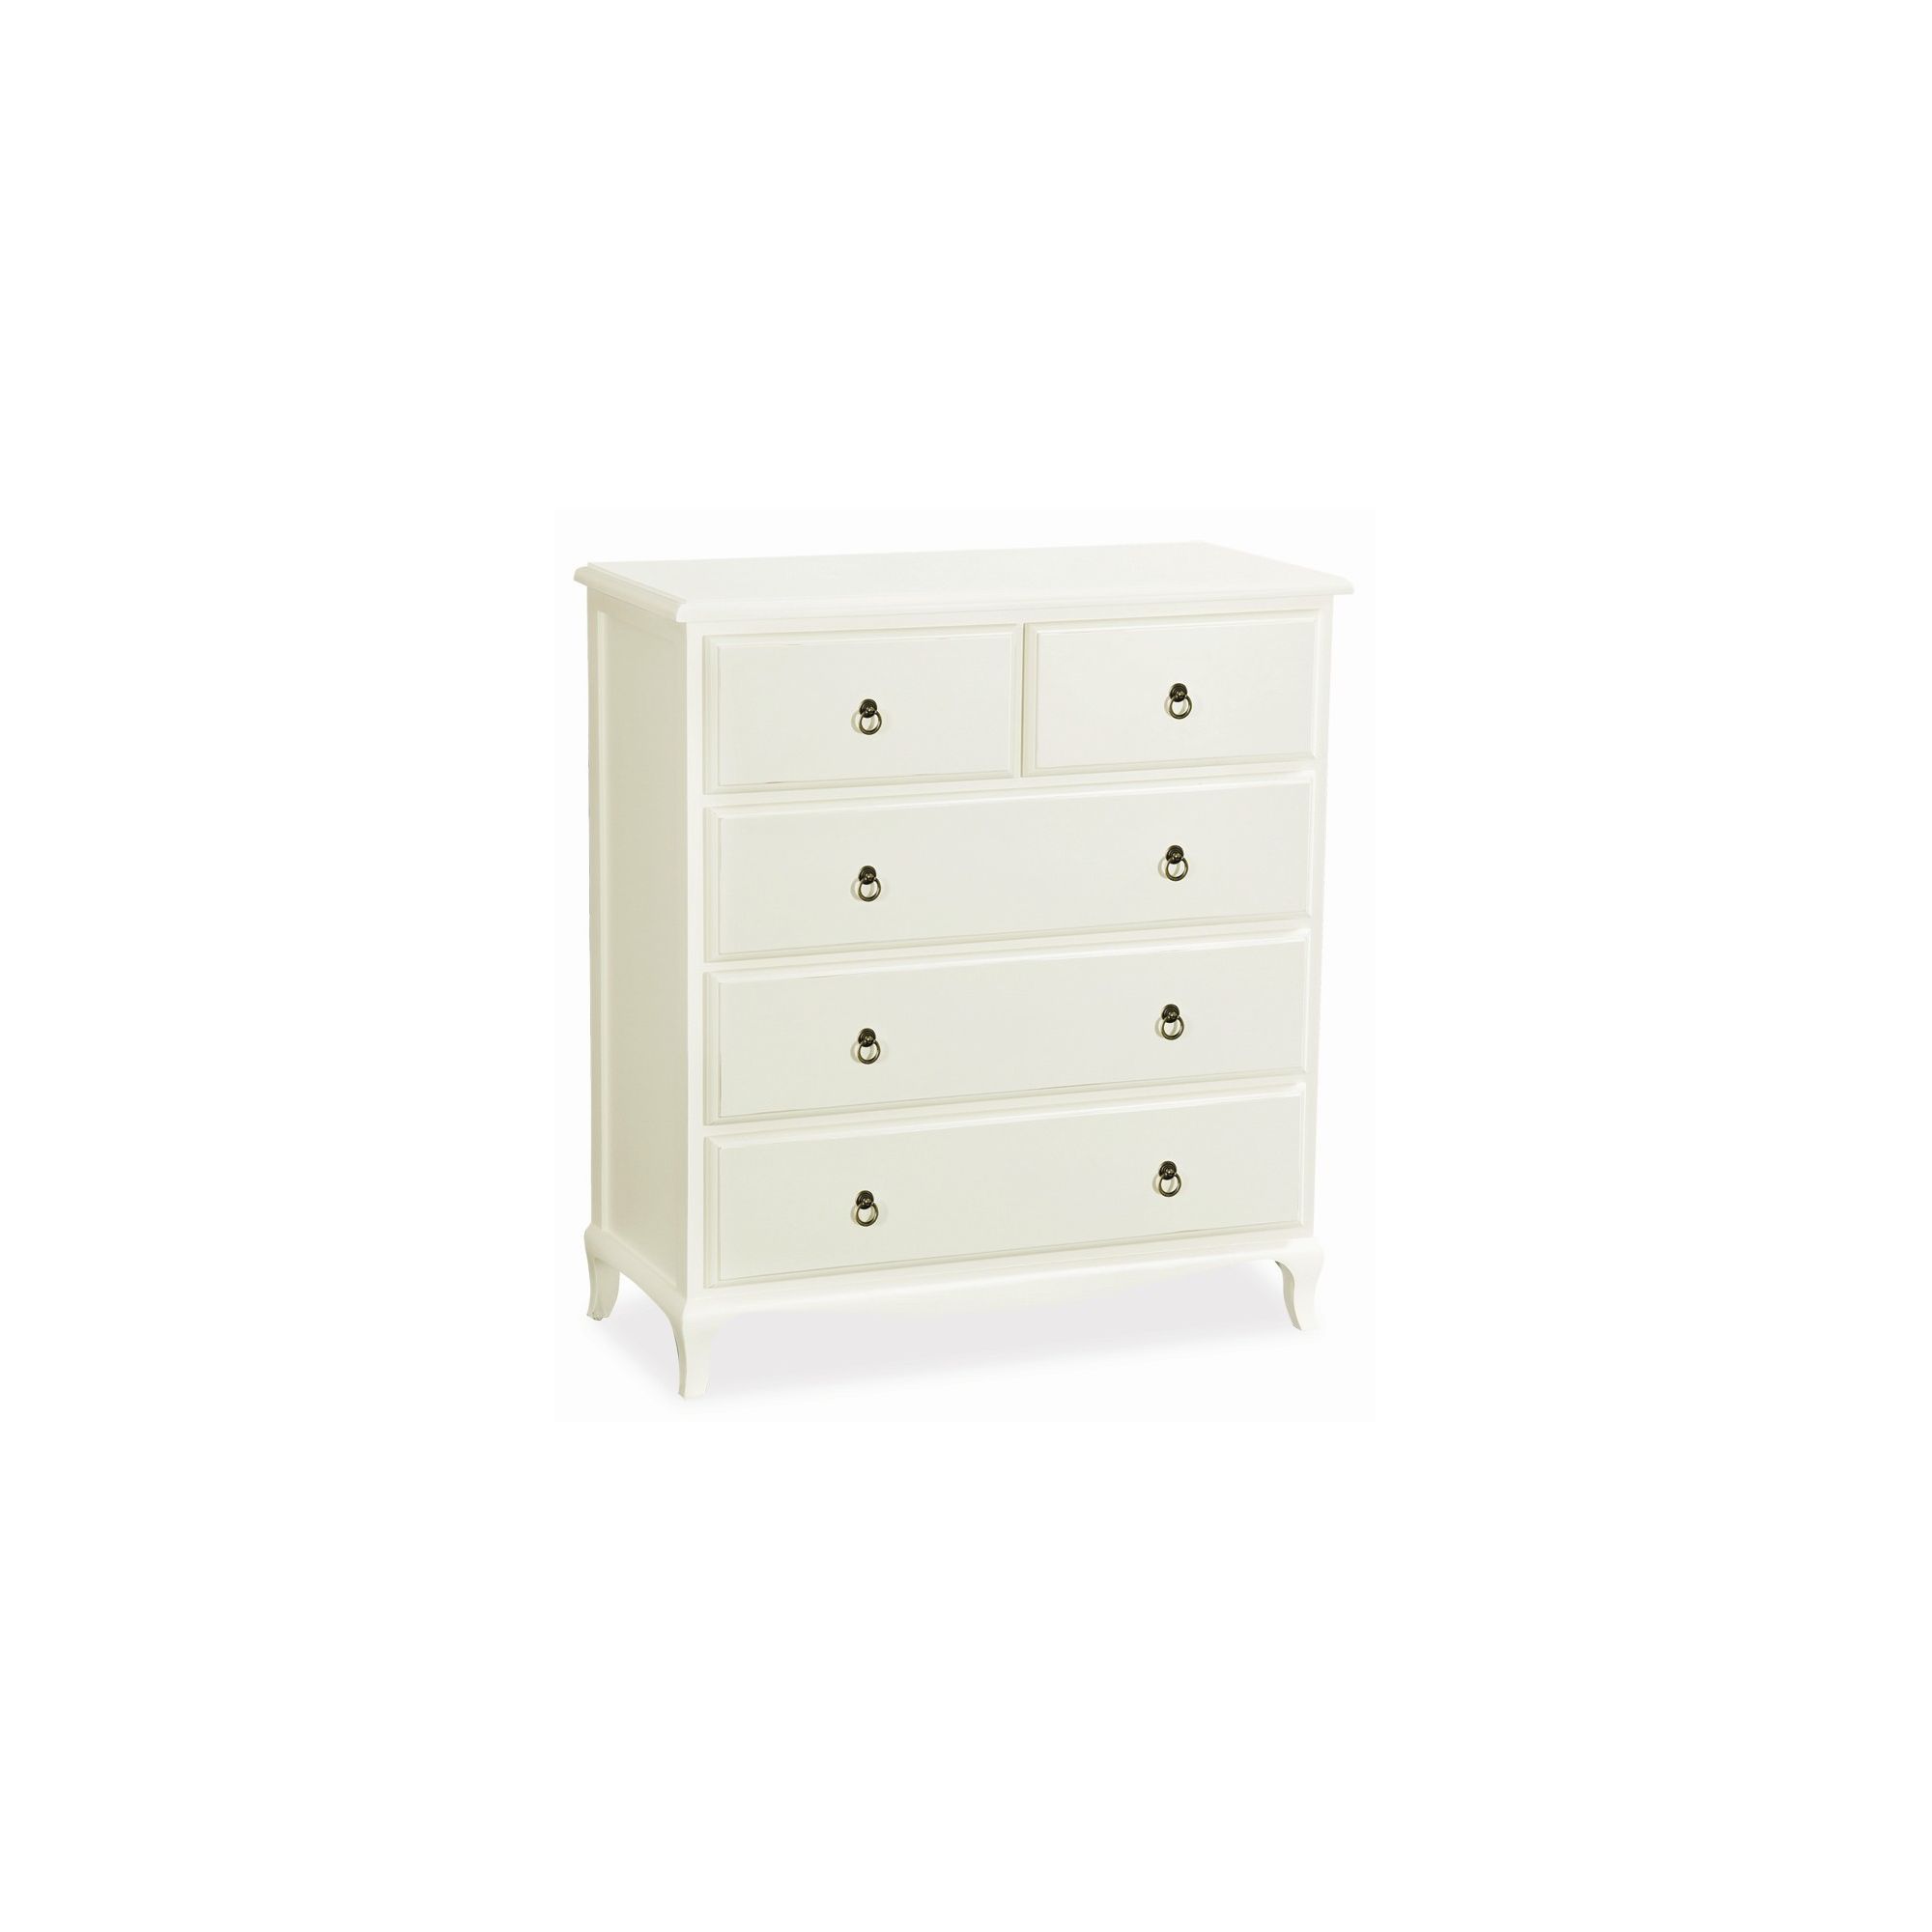 Alterton Furniture Normandy 3 Drawer Chest at Tescos Direct